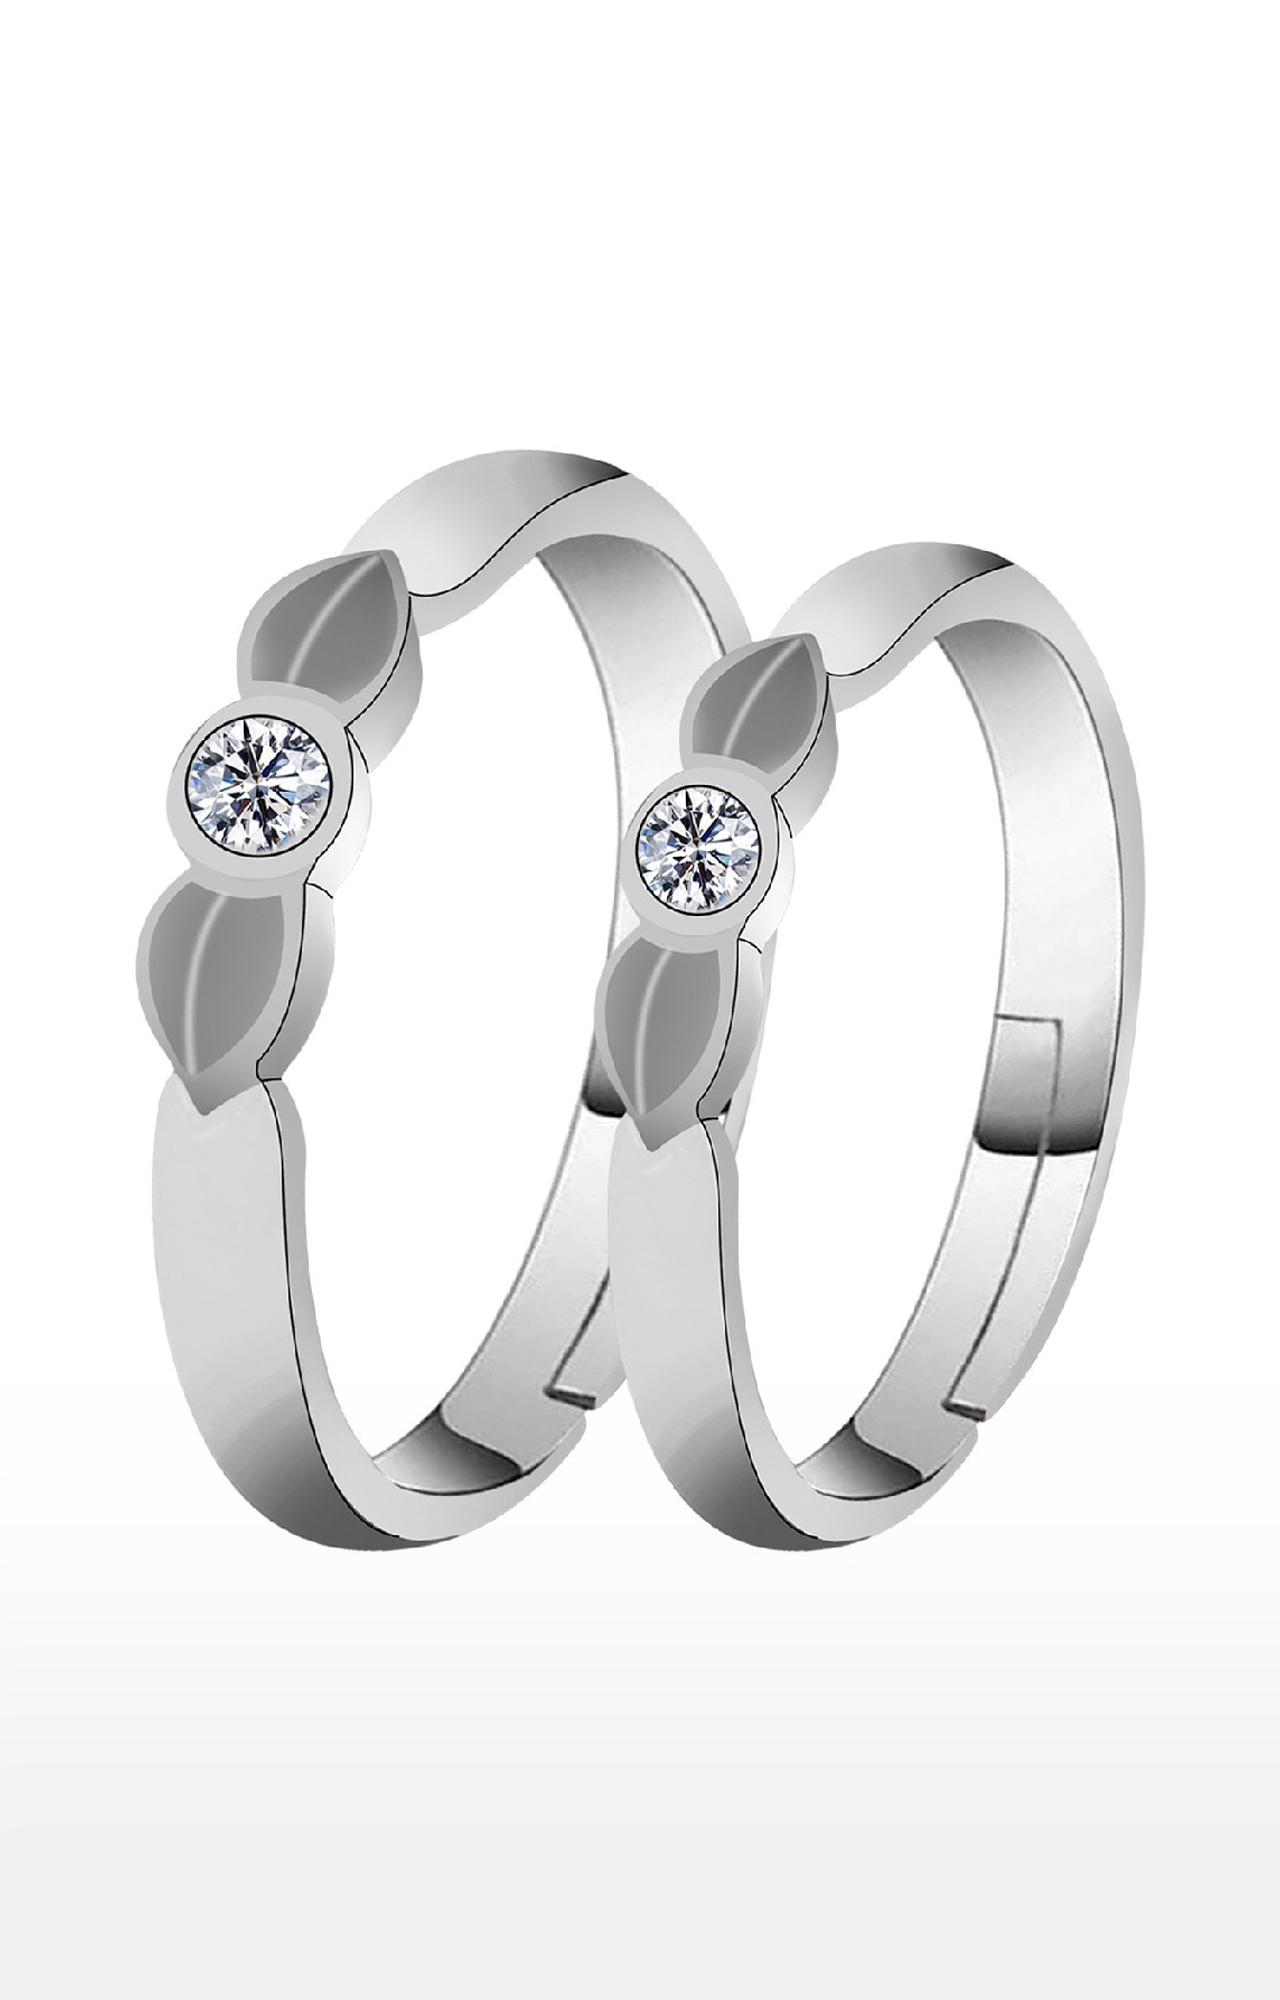 SILVER SHINE | Adjustable Couple Rings Set for lovers Silver Plated Solitaire for Men and Women-2 pieces